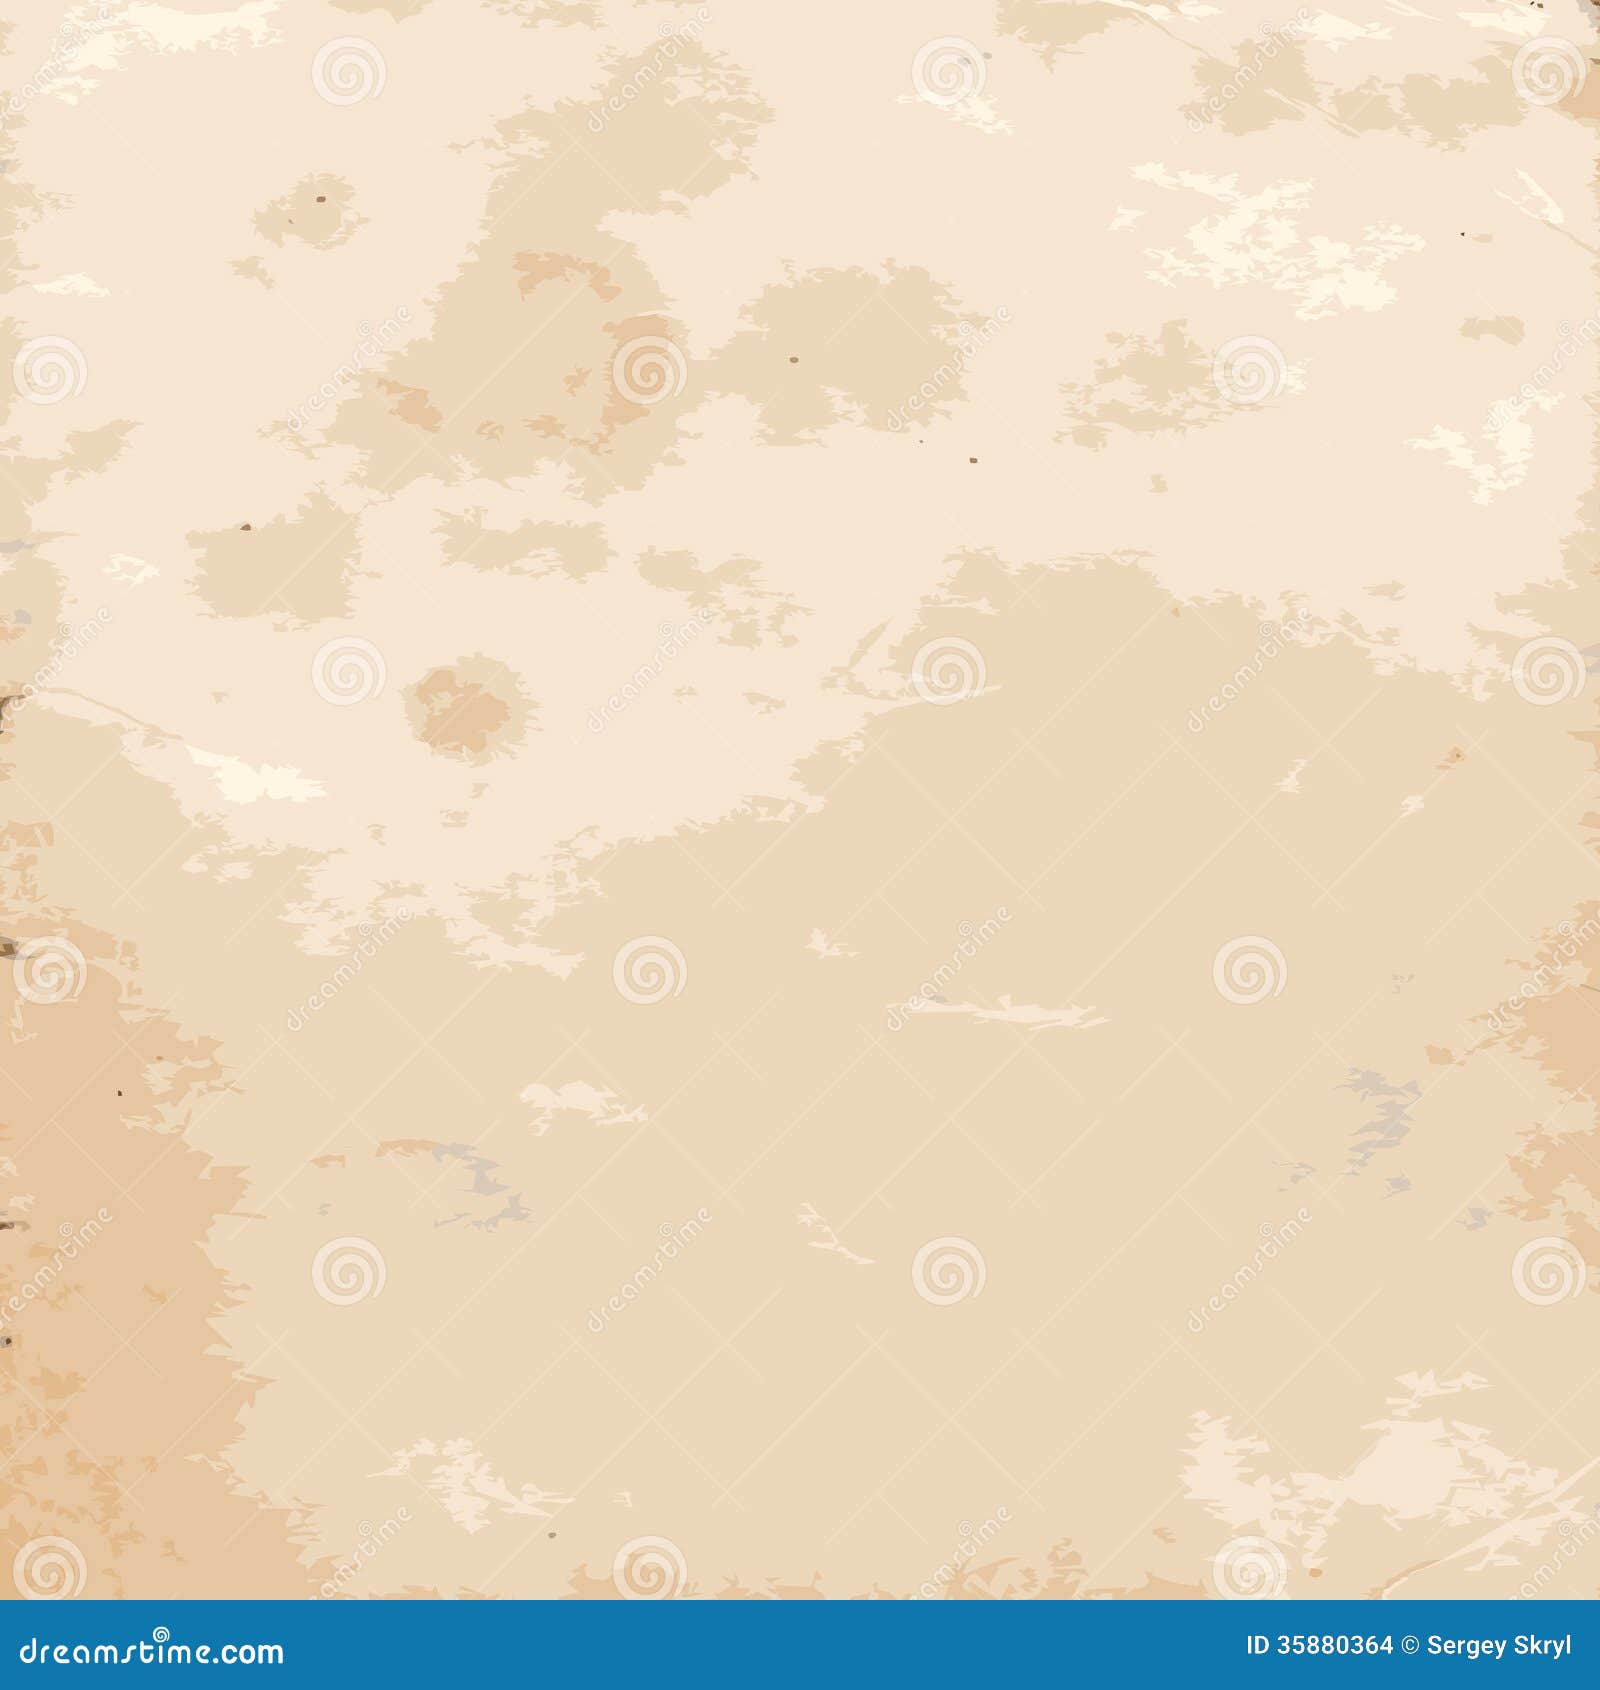 Old abstract background stock vector. Illustration of brown - 35880364